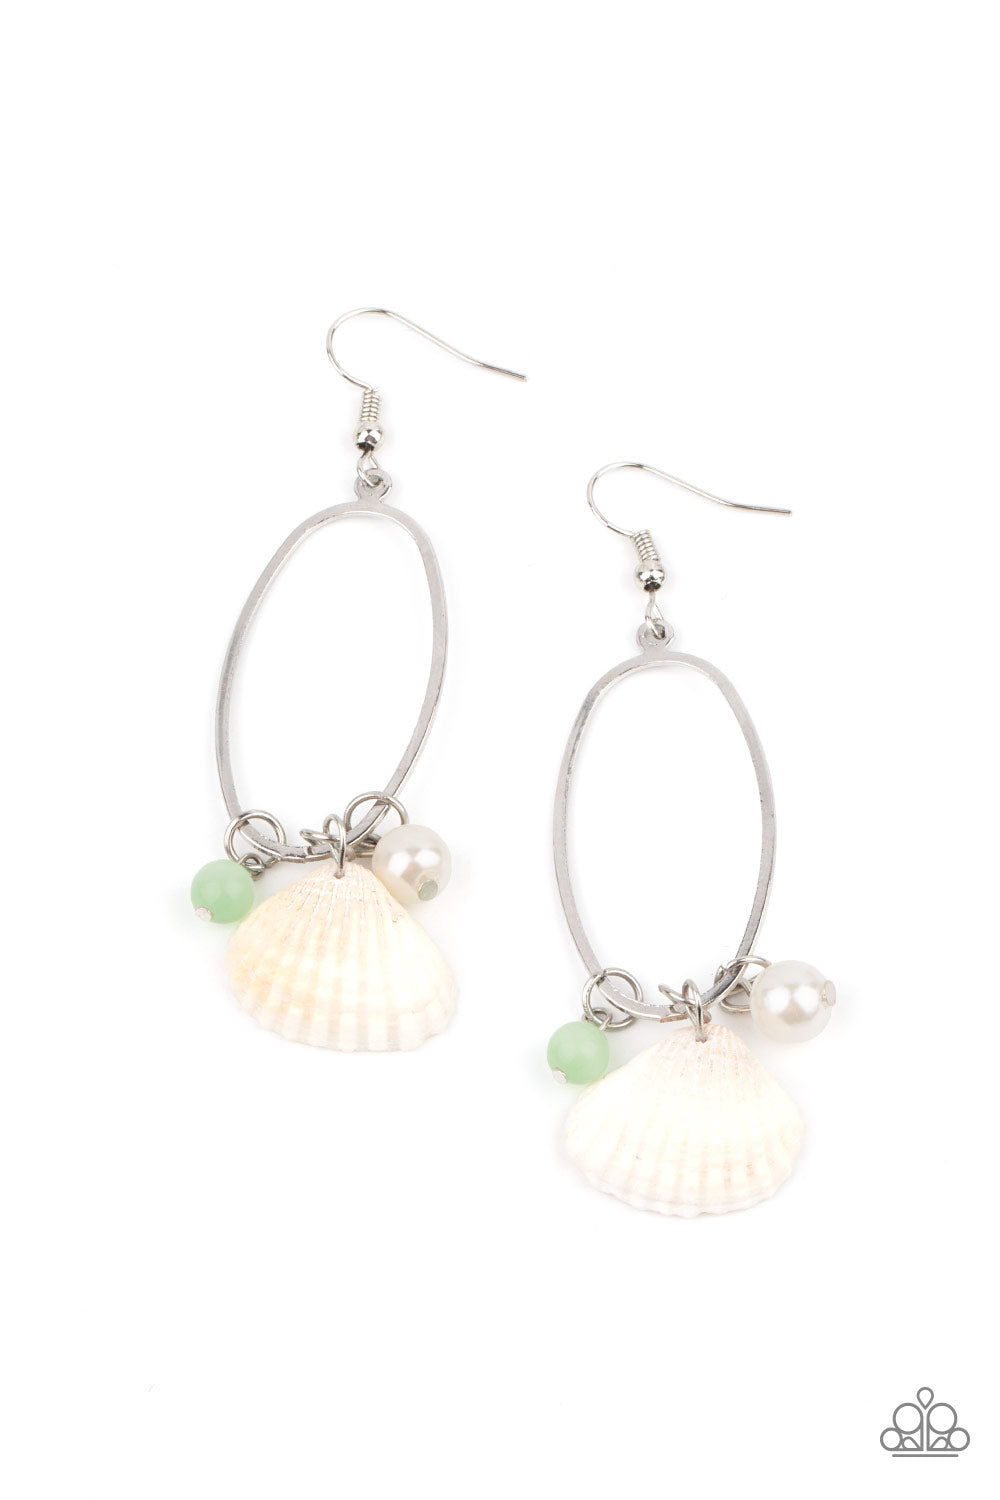 This Too SHELL Pass Green Earrings - Paparazzi